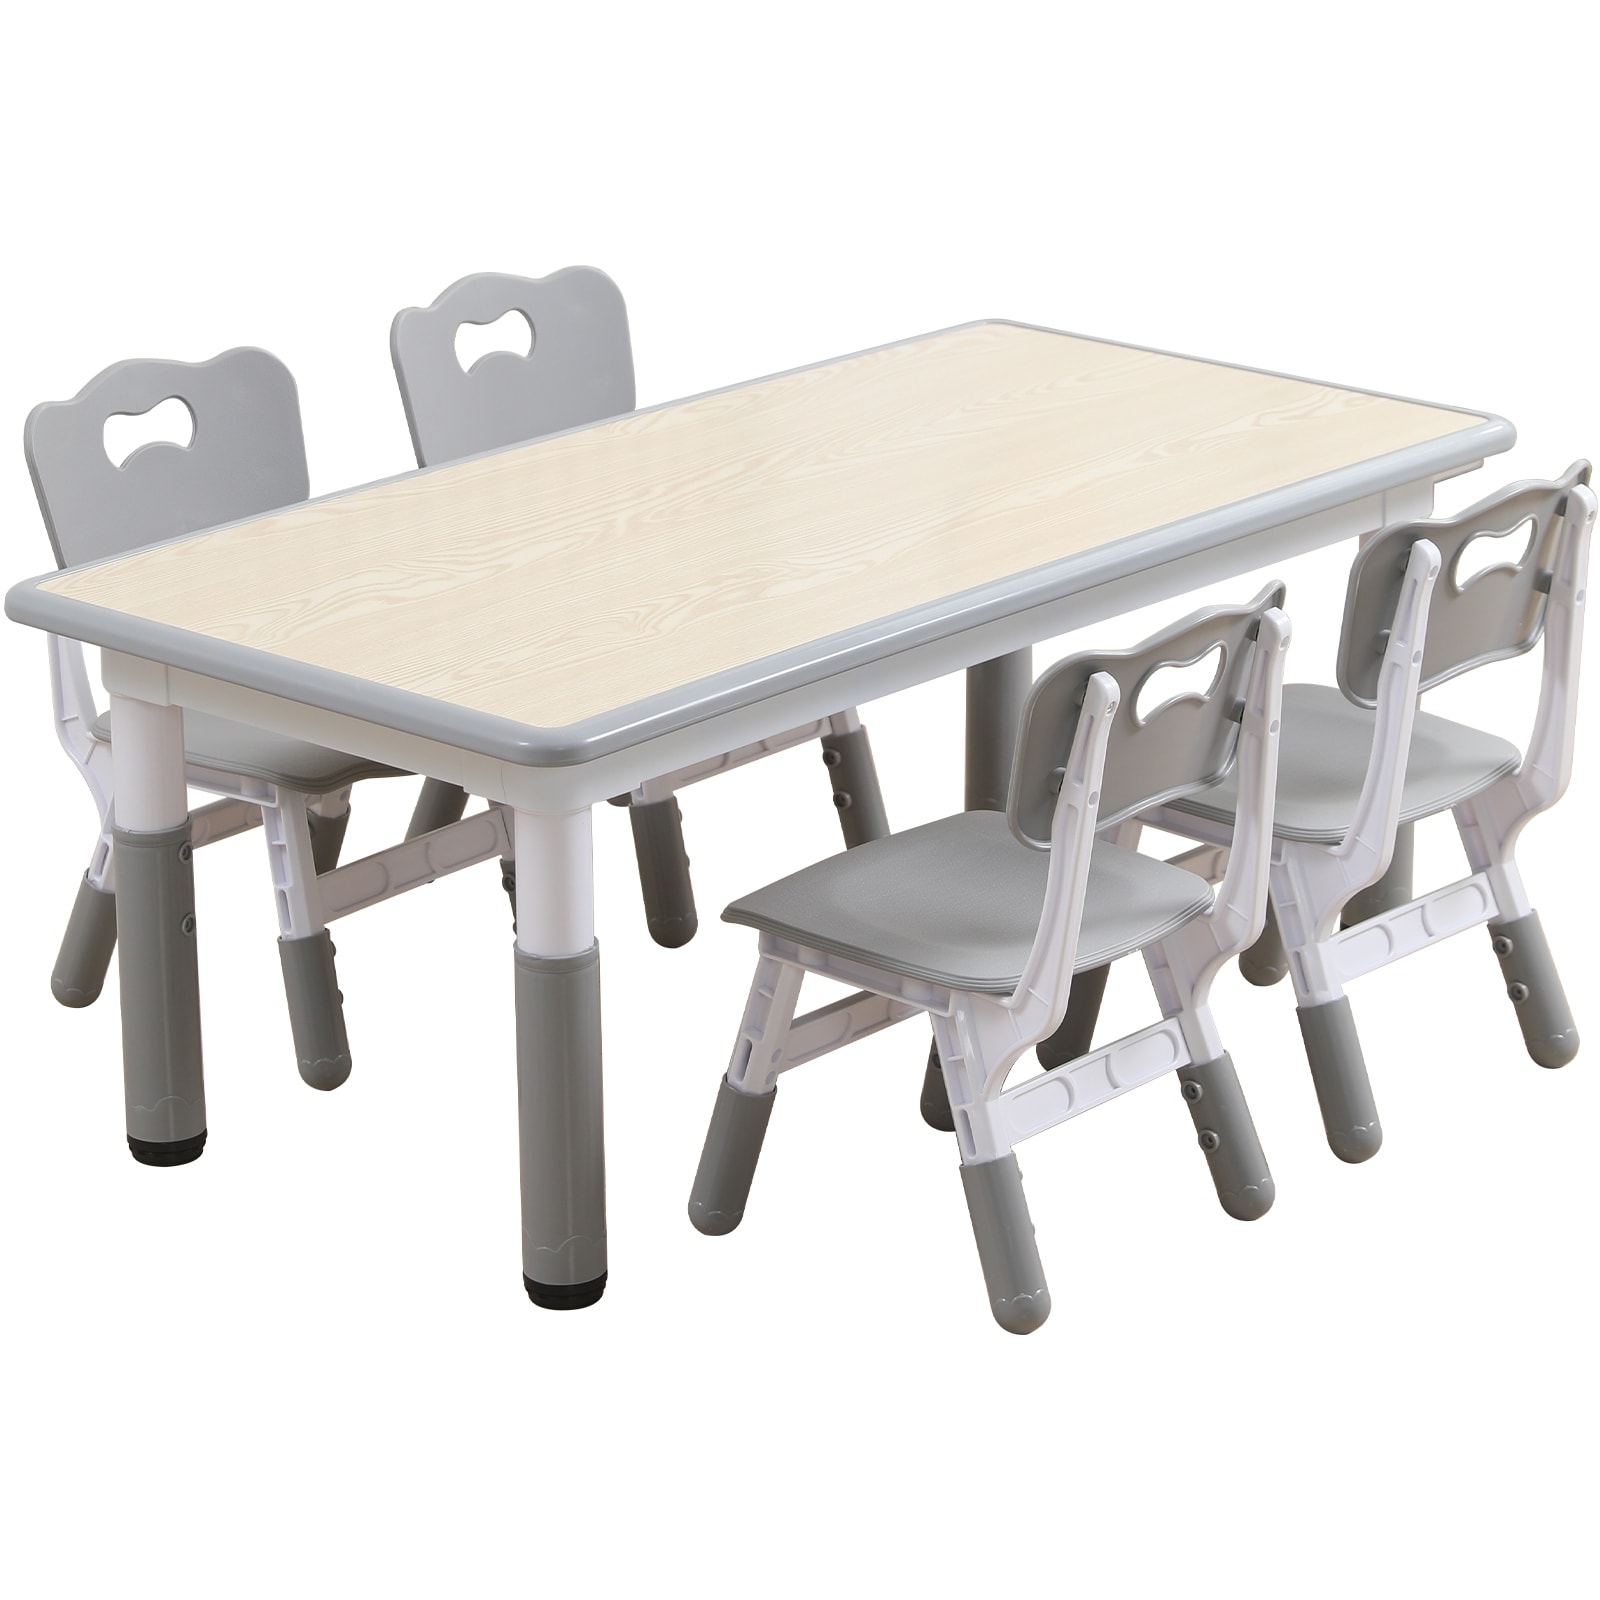 YUKOOL Kids Table and Chair Set - Adjustable Height, HDPE Material, Perfect for Ages 2-12